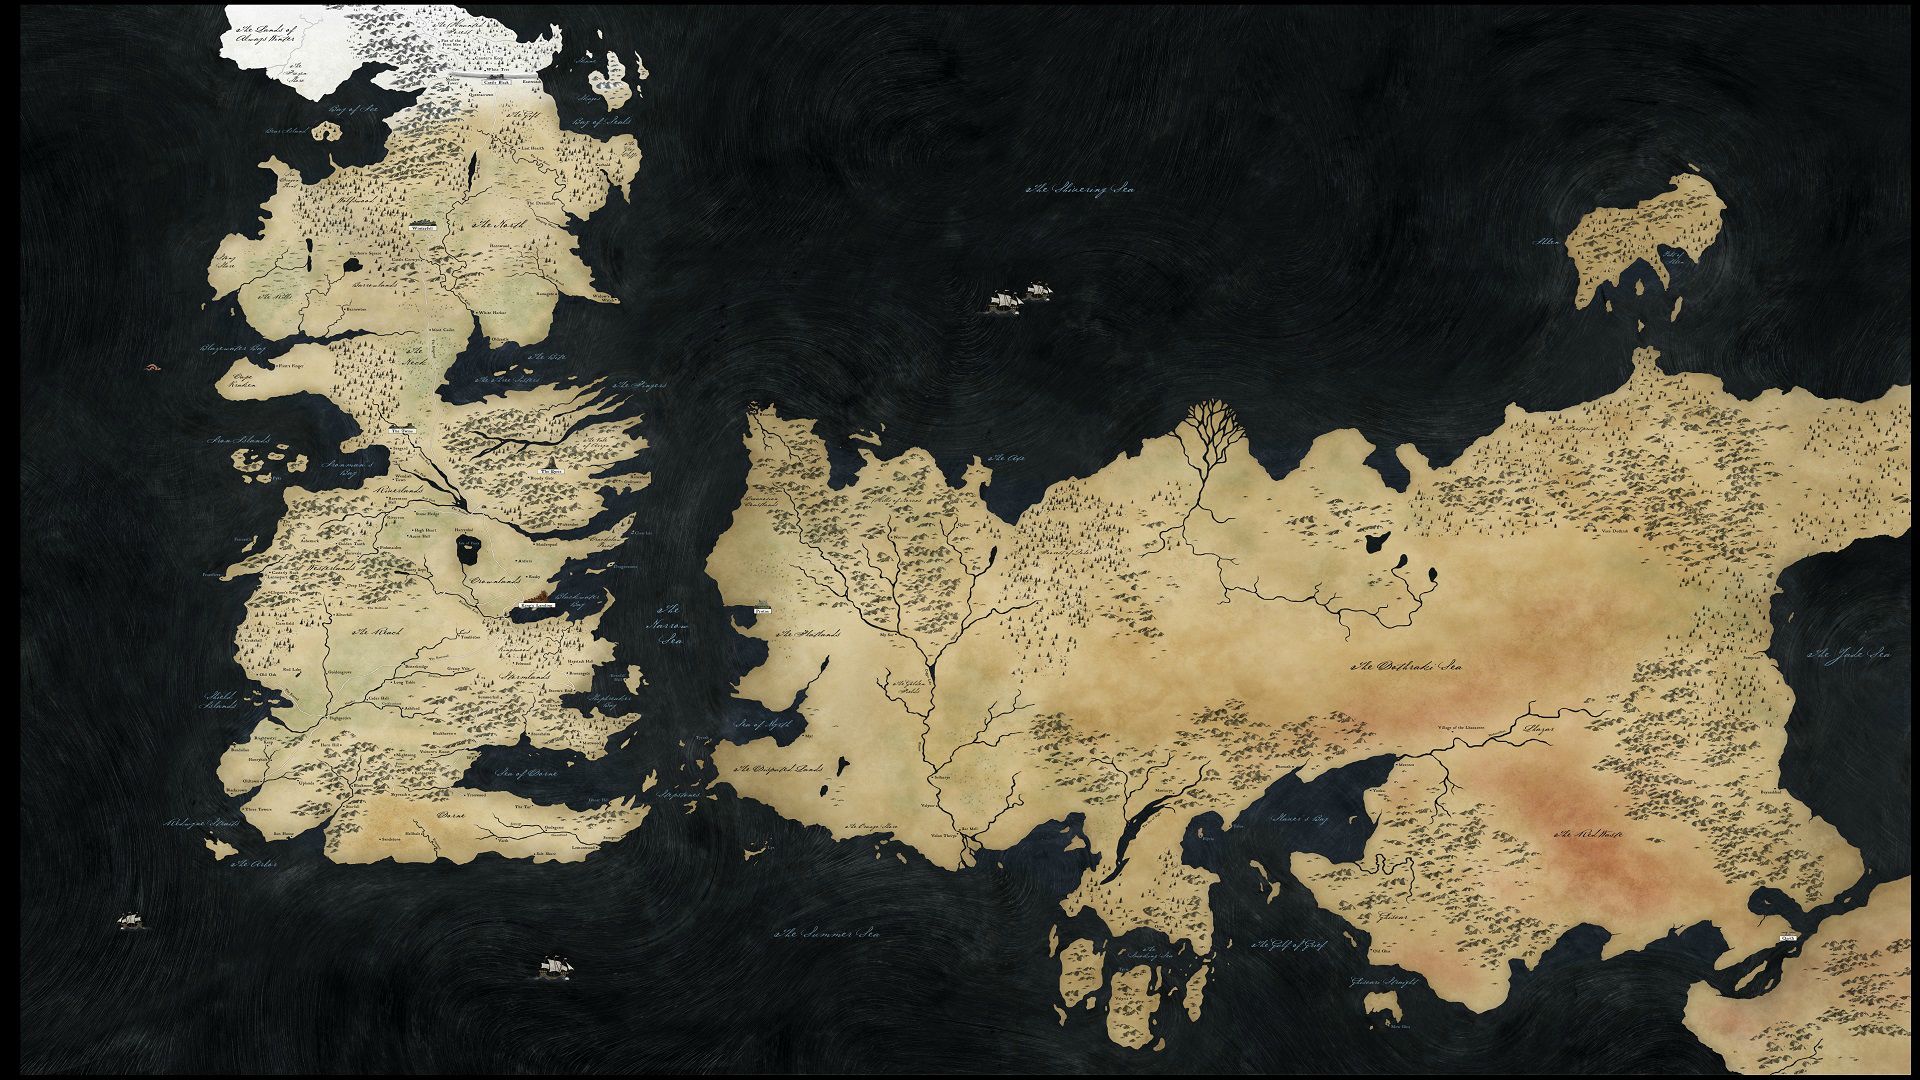 game of thrones, map, tv show